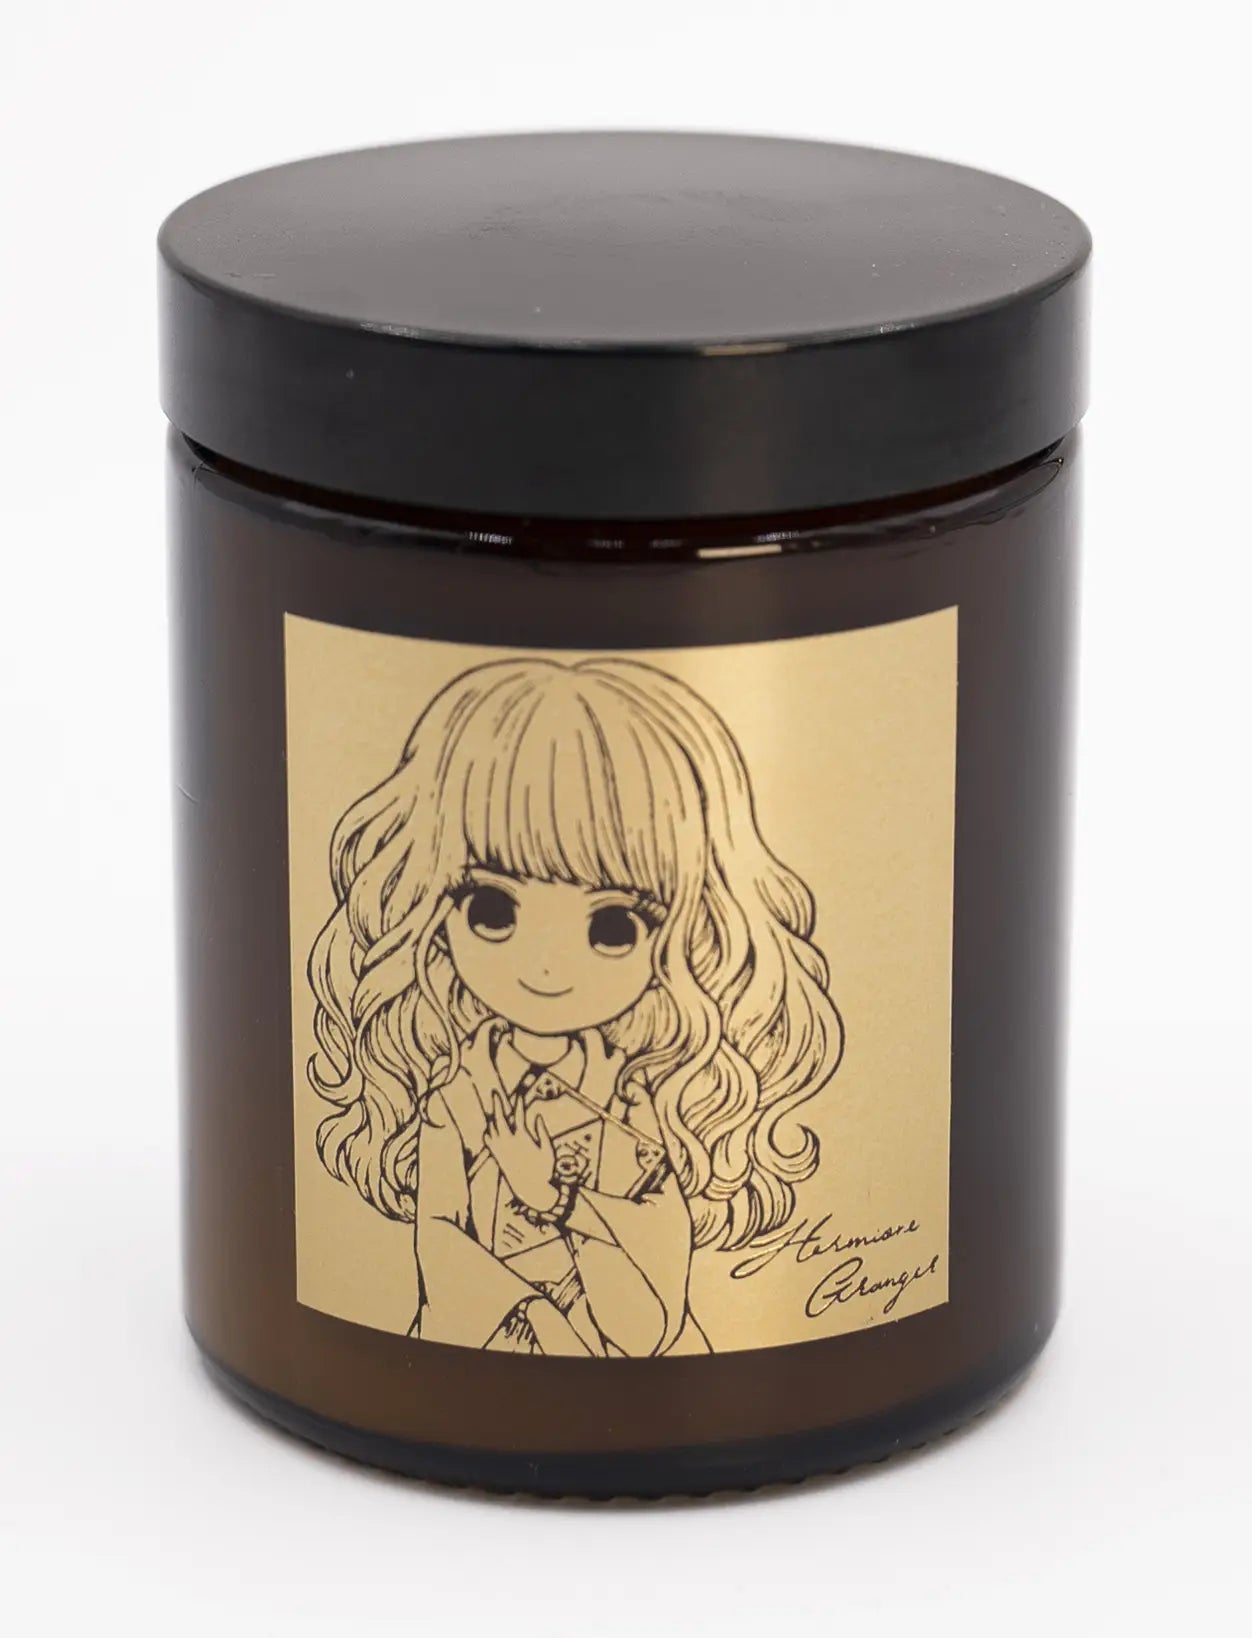 HARRY POTTER SCENTED CANDLE - HERMIONE GRANGER